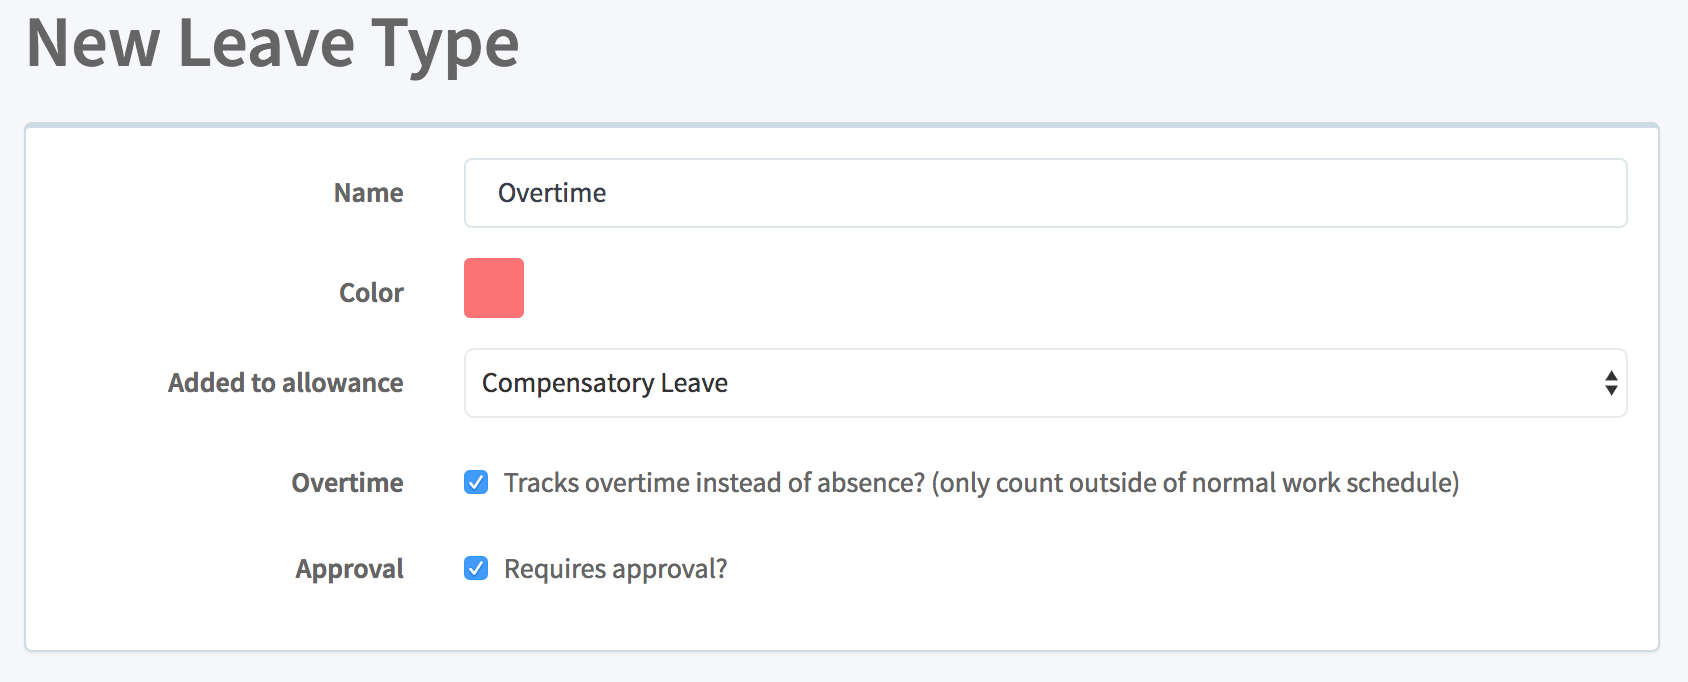 Overtime Leave Type with Compensatory Leave allowance